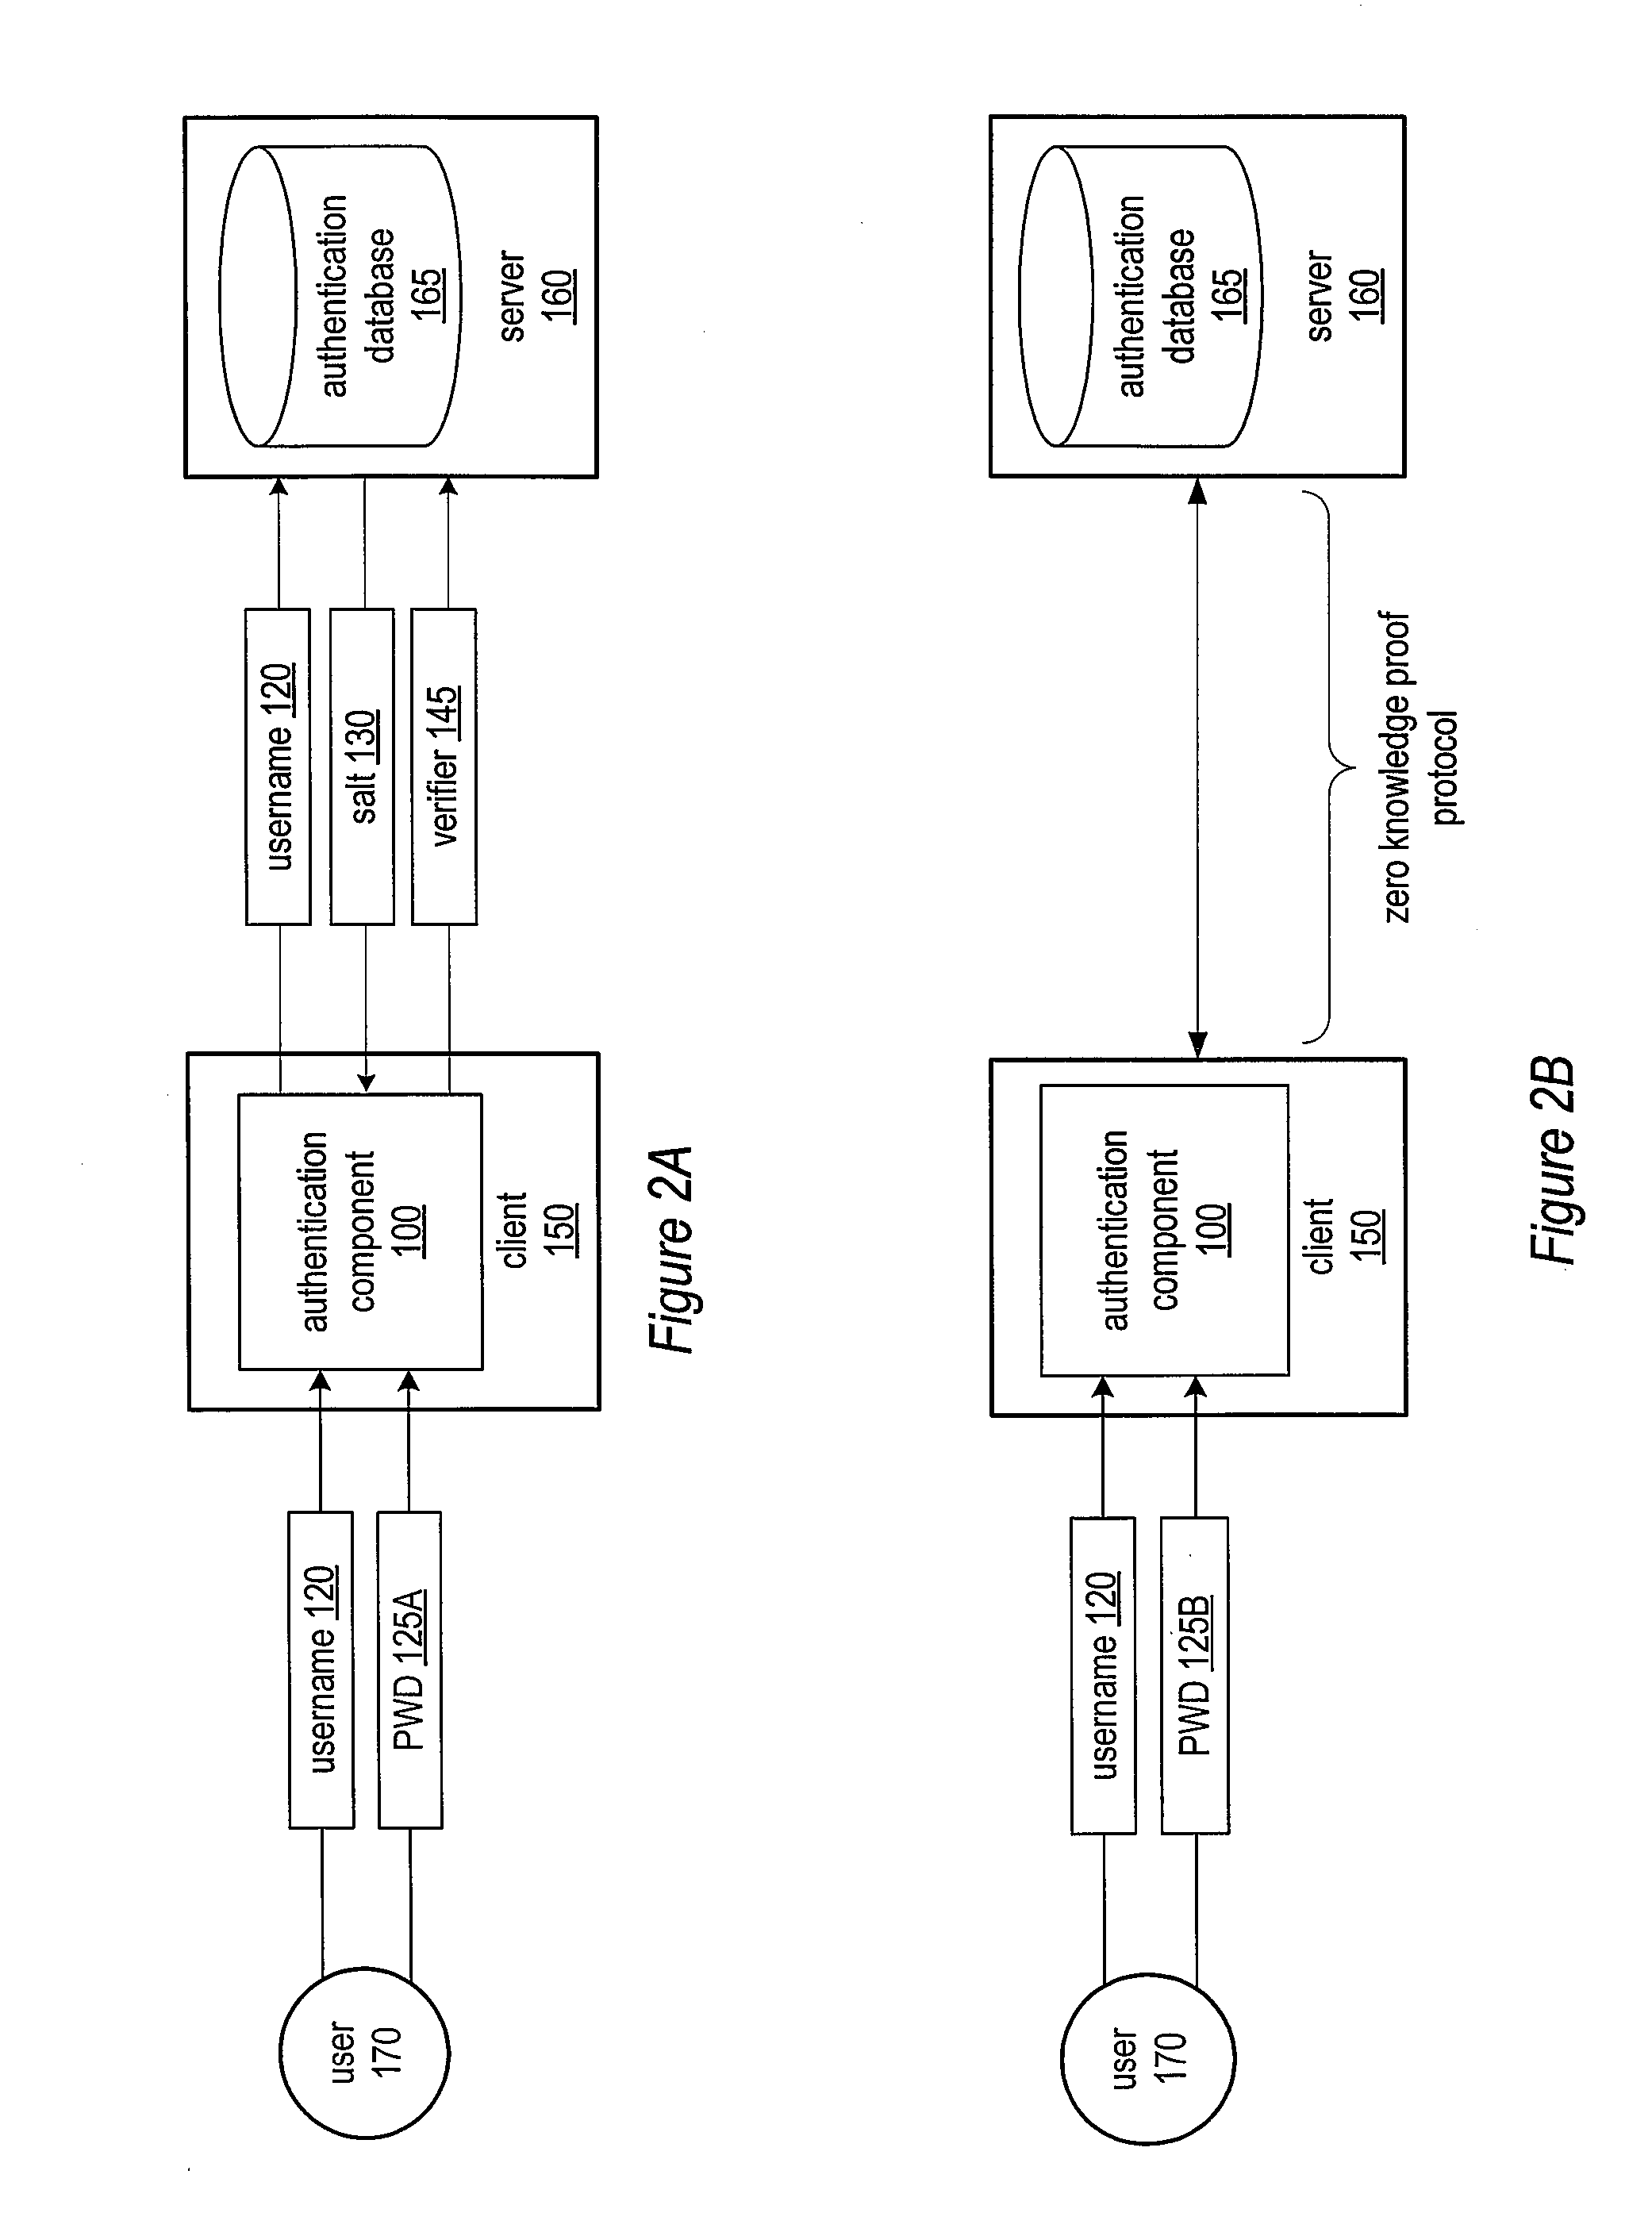 System and Method for Secure Password-Based Authentication